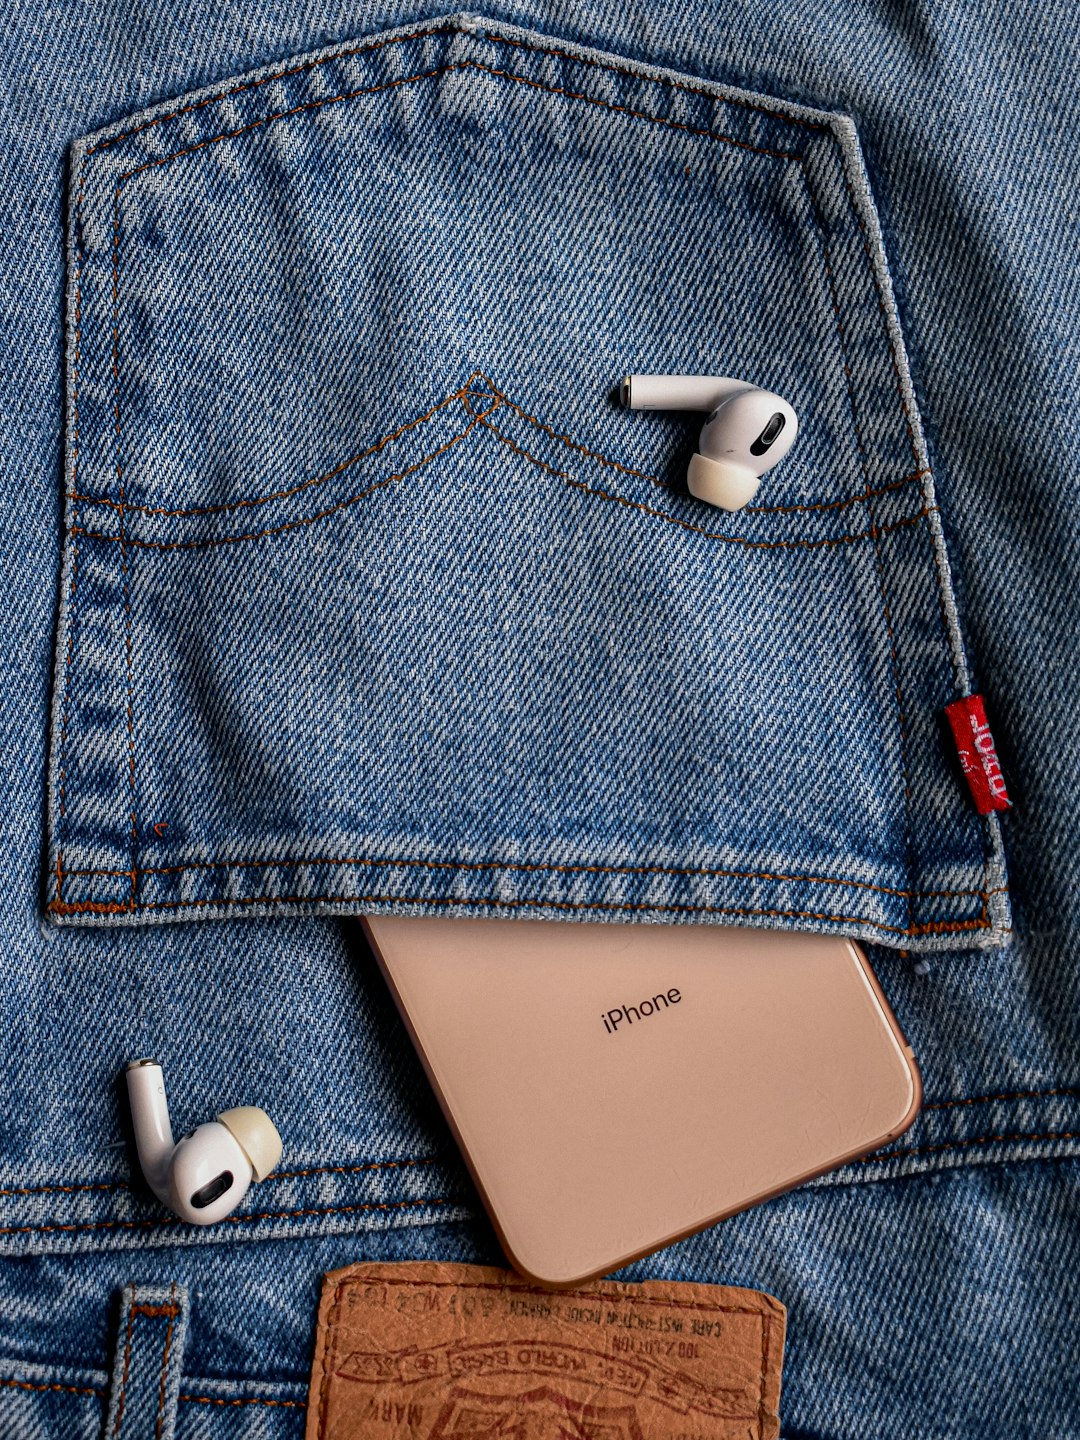 white earbuds on blue denim jeans